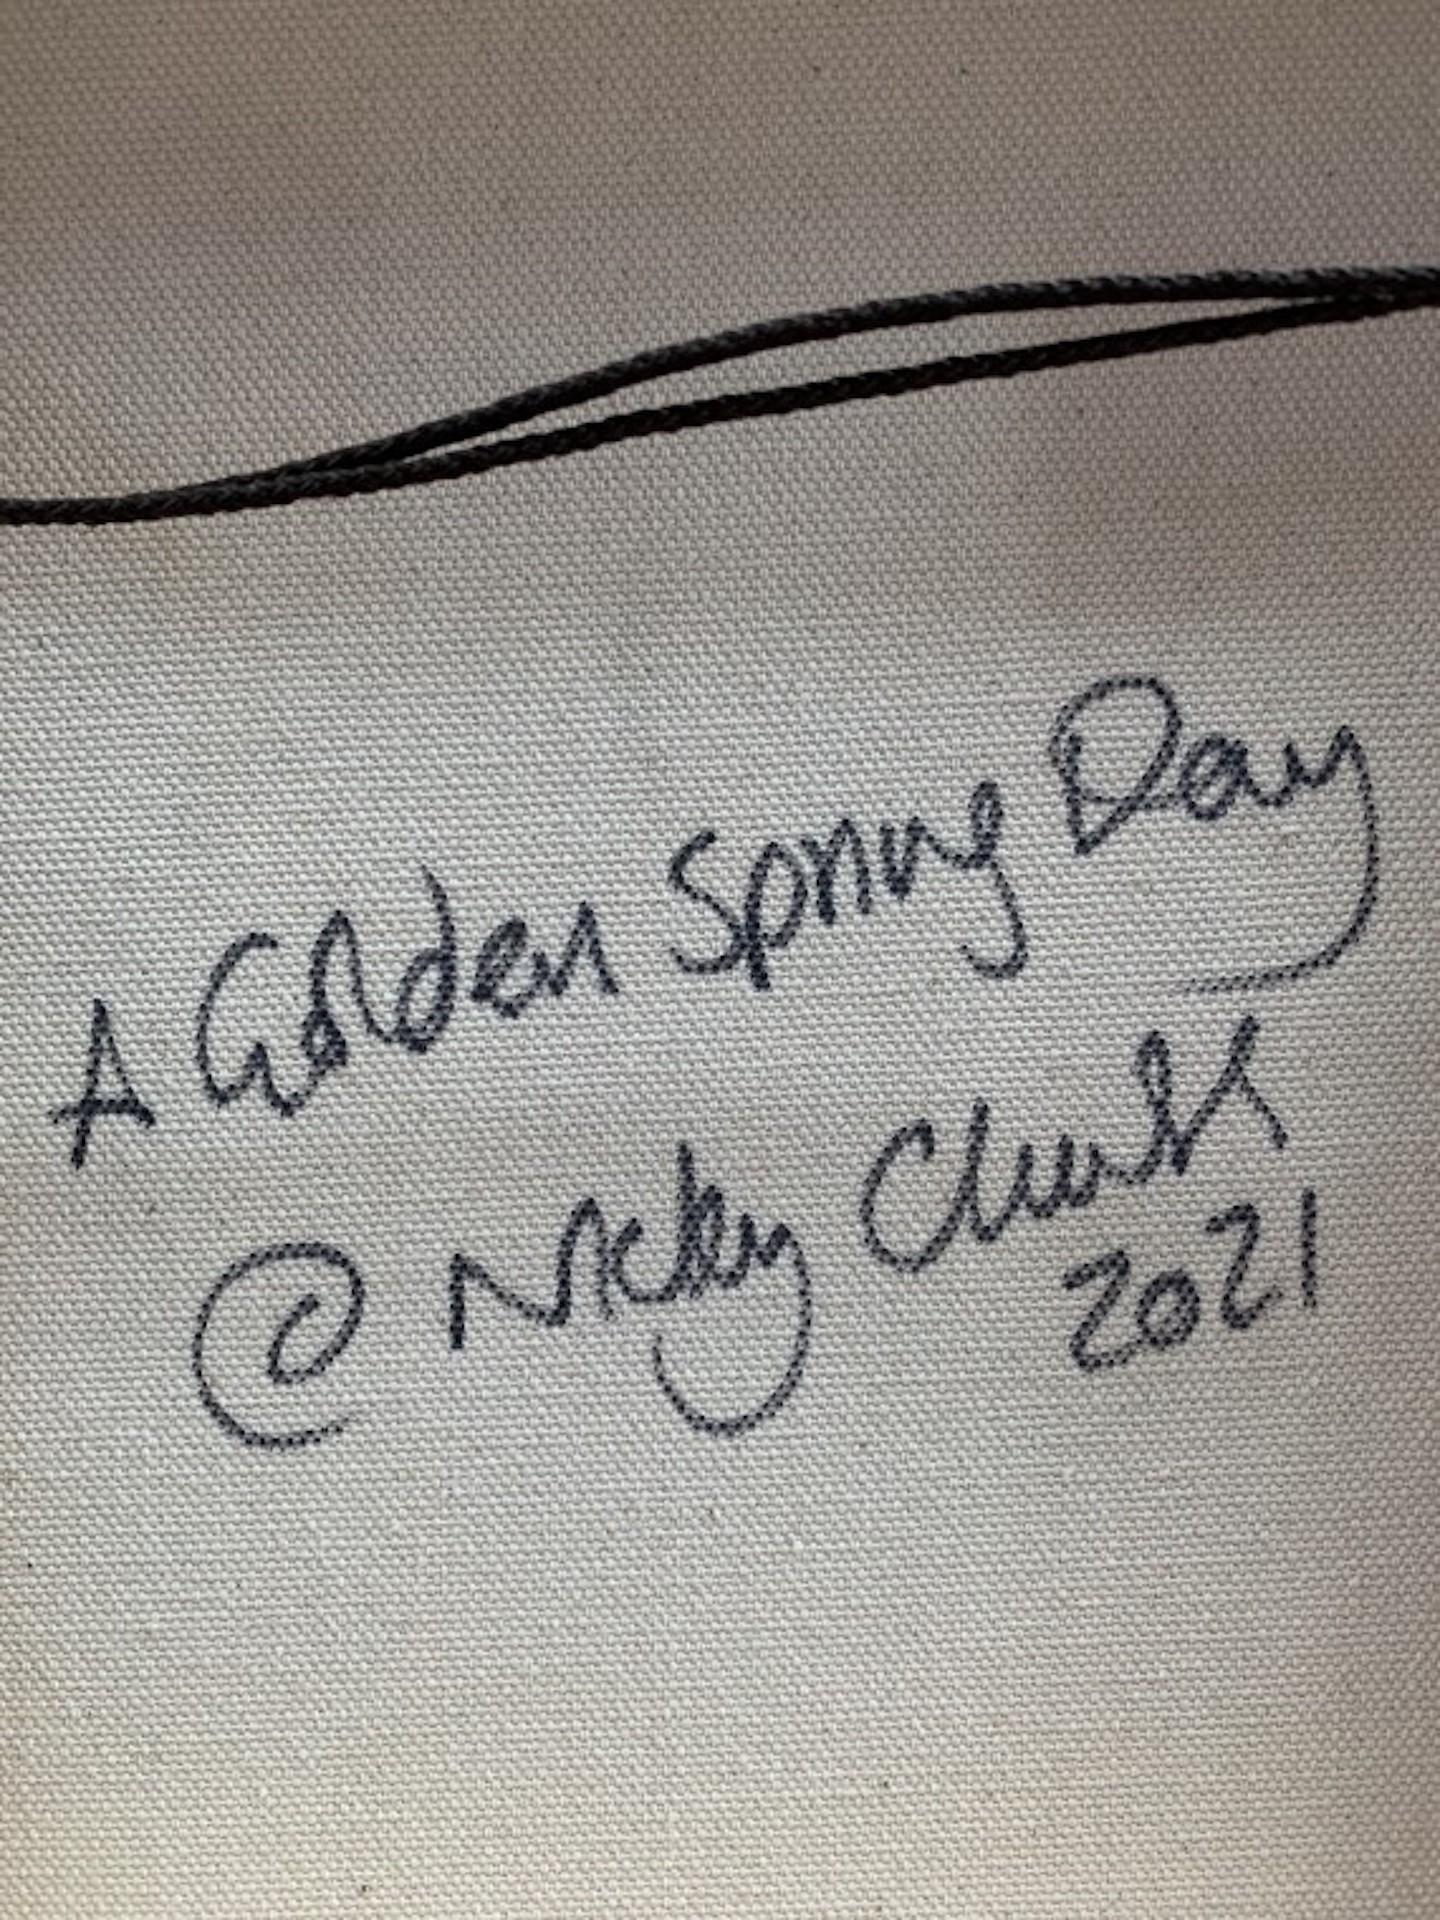 A Golden Spring Day, Nicky Chubb, Original Floral Landscape Painting For Sale For Sale 2